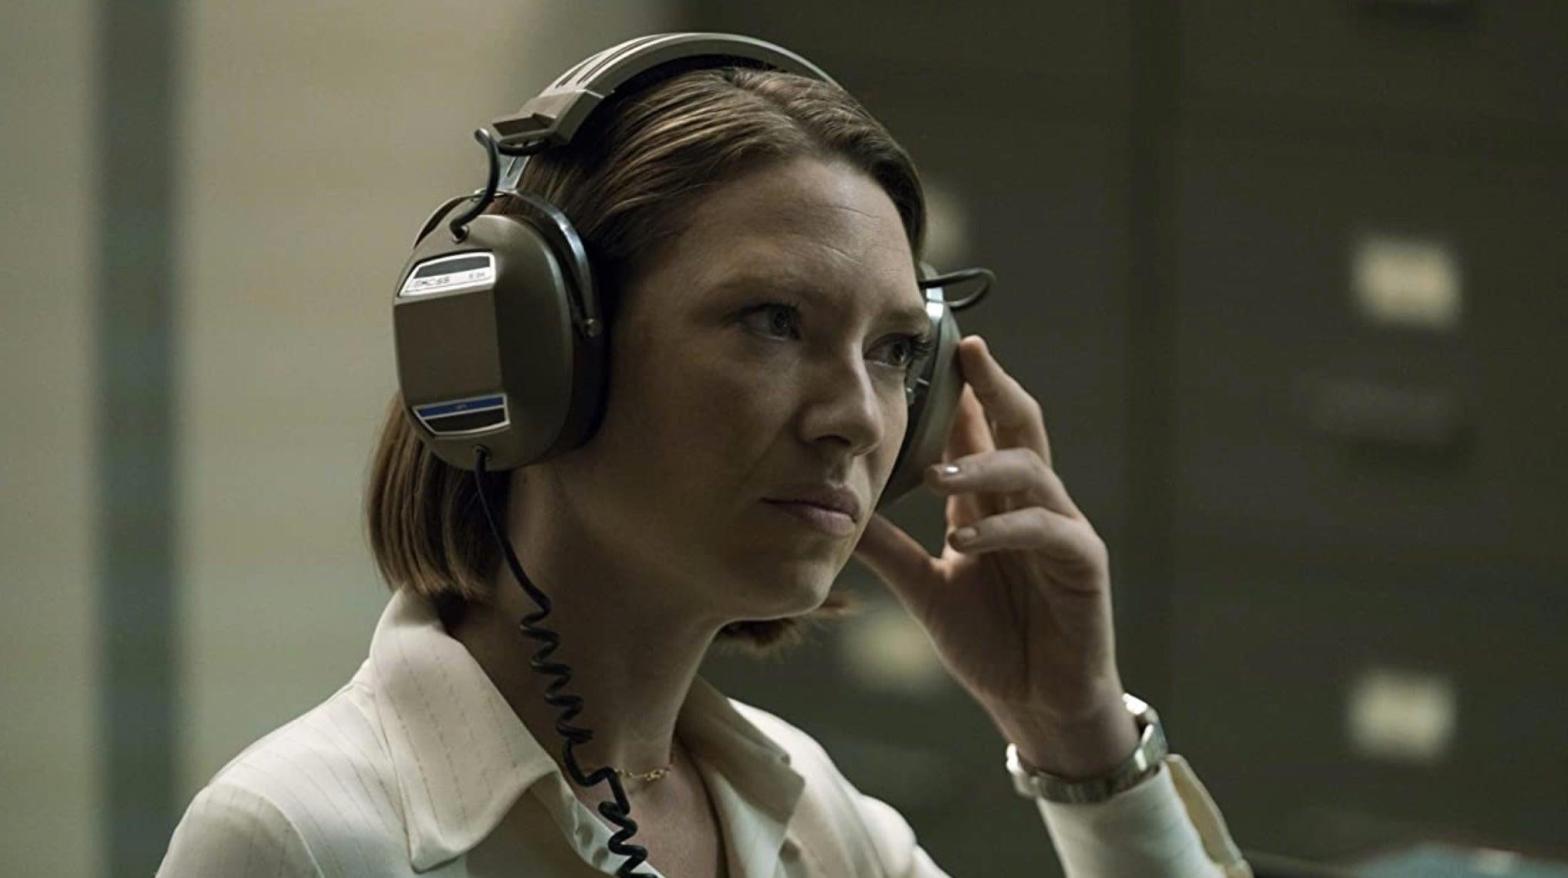 Anna Torv, seen here on Mindhunter, is joining HBO's The Last of Us. (Photo: Netflix)